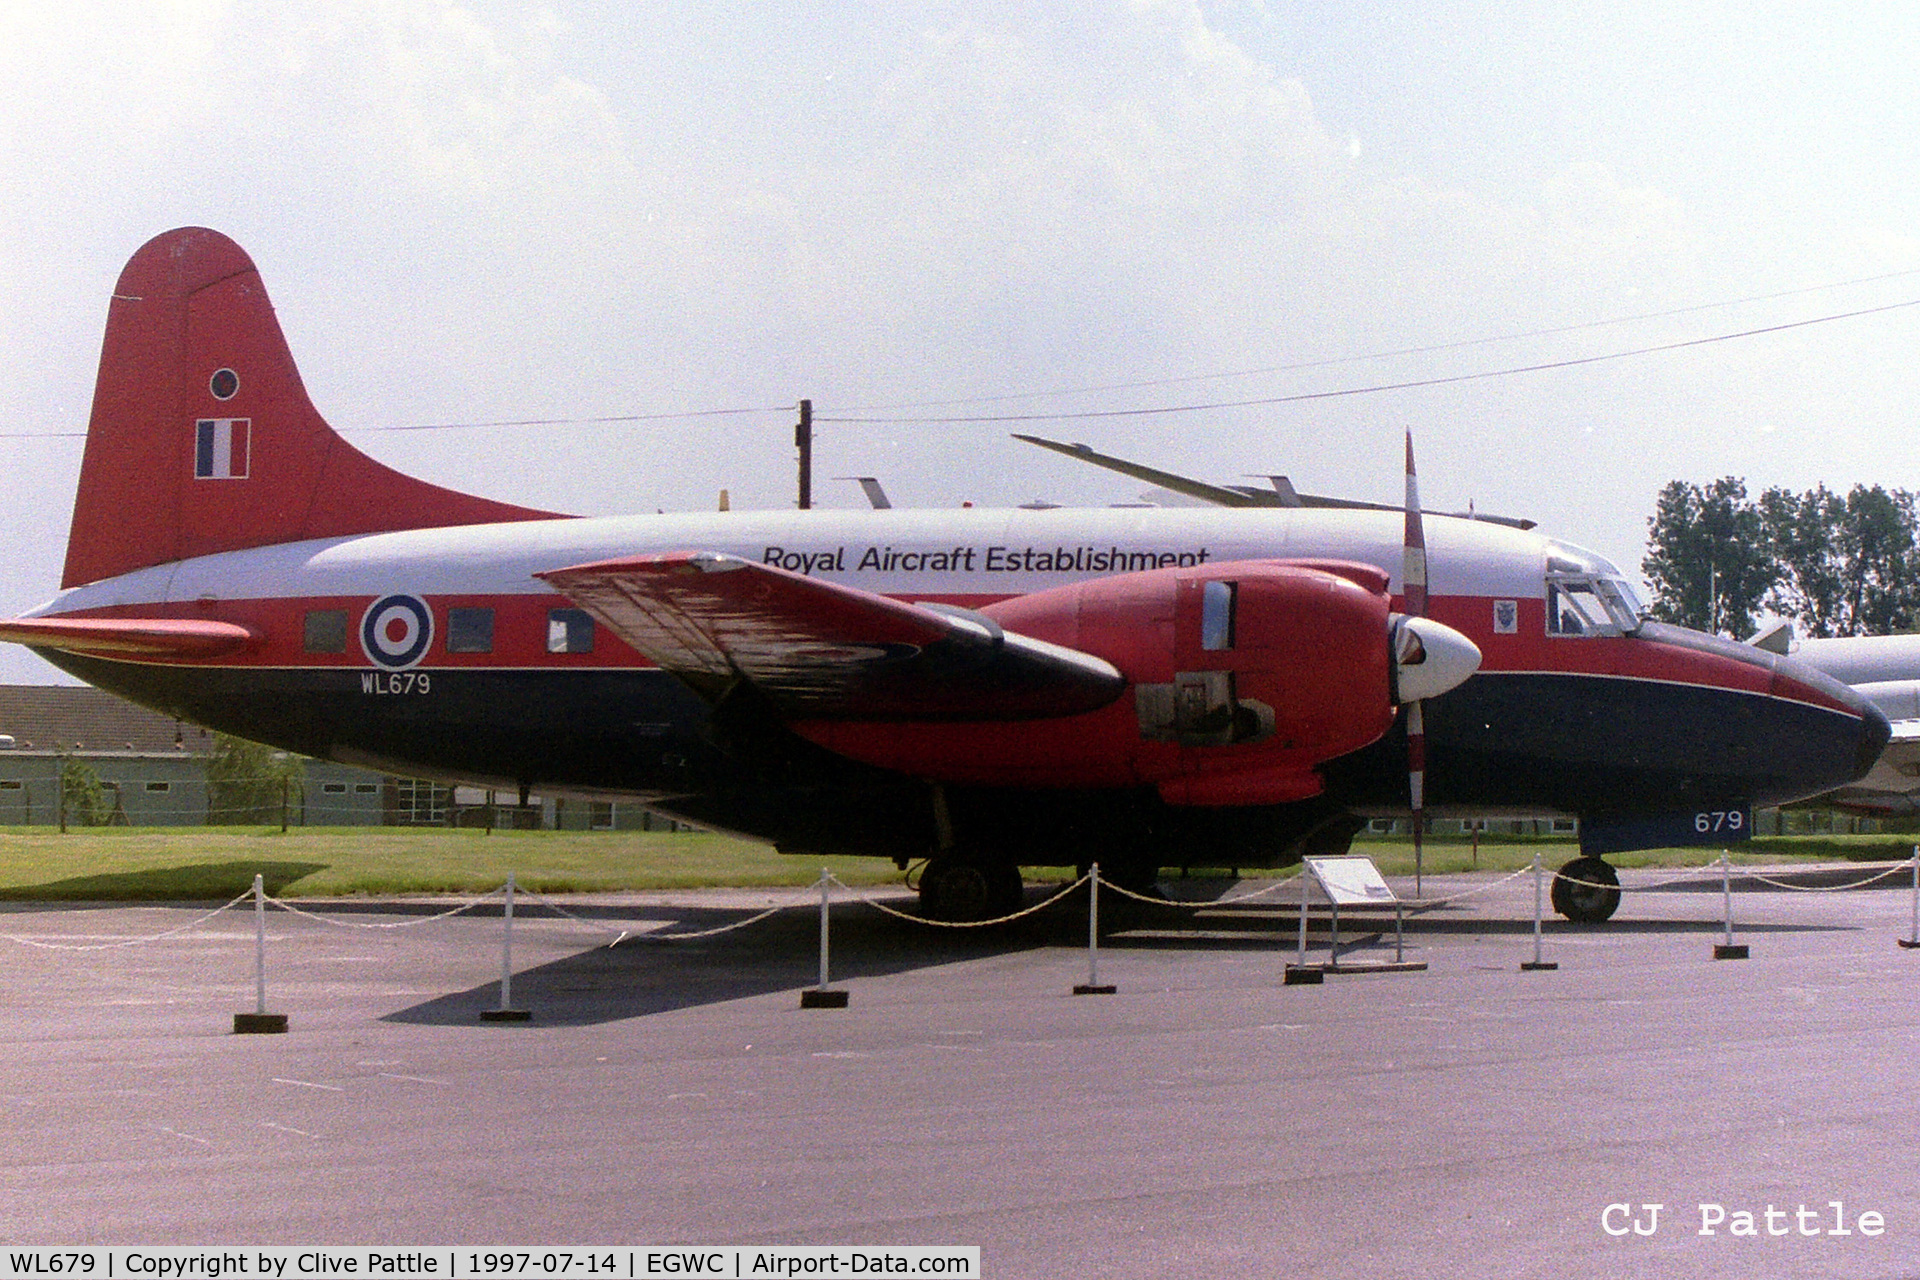 WL679, 1953 Vickers Varsity T.1 C/N Not found WL679, On external display at the aerospace museum RAF Cosford EGWC